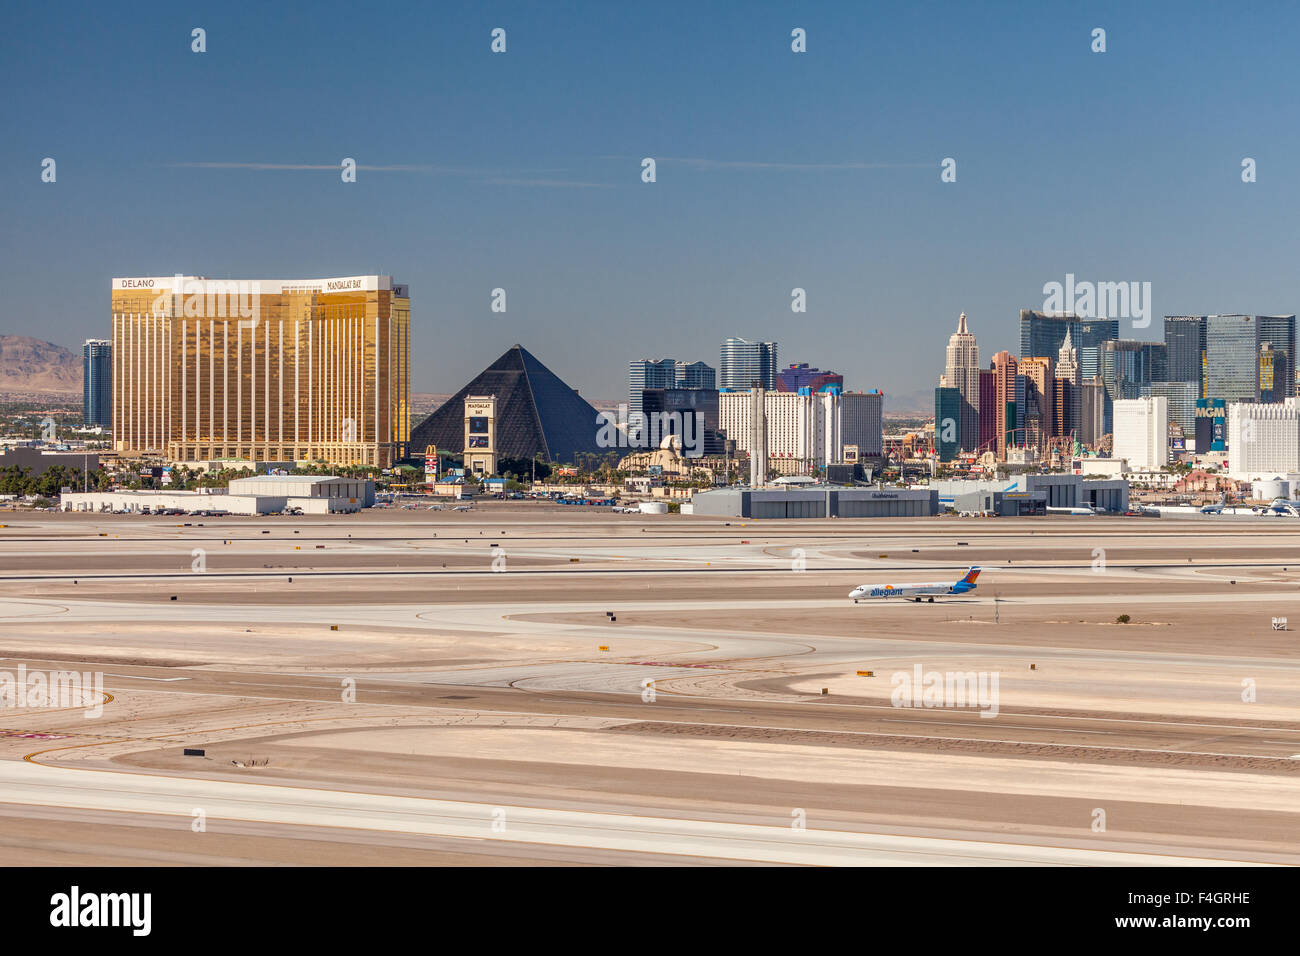 The south end of the Las Vegas Strip with McCarran Airport in the foreground Stock Photo